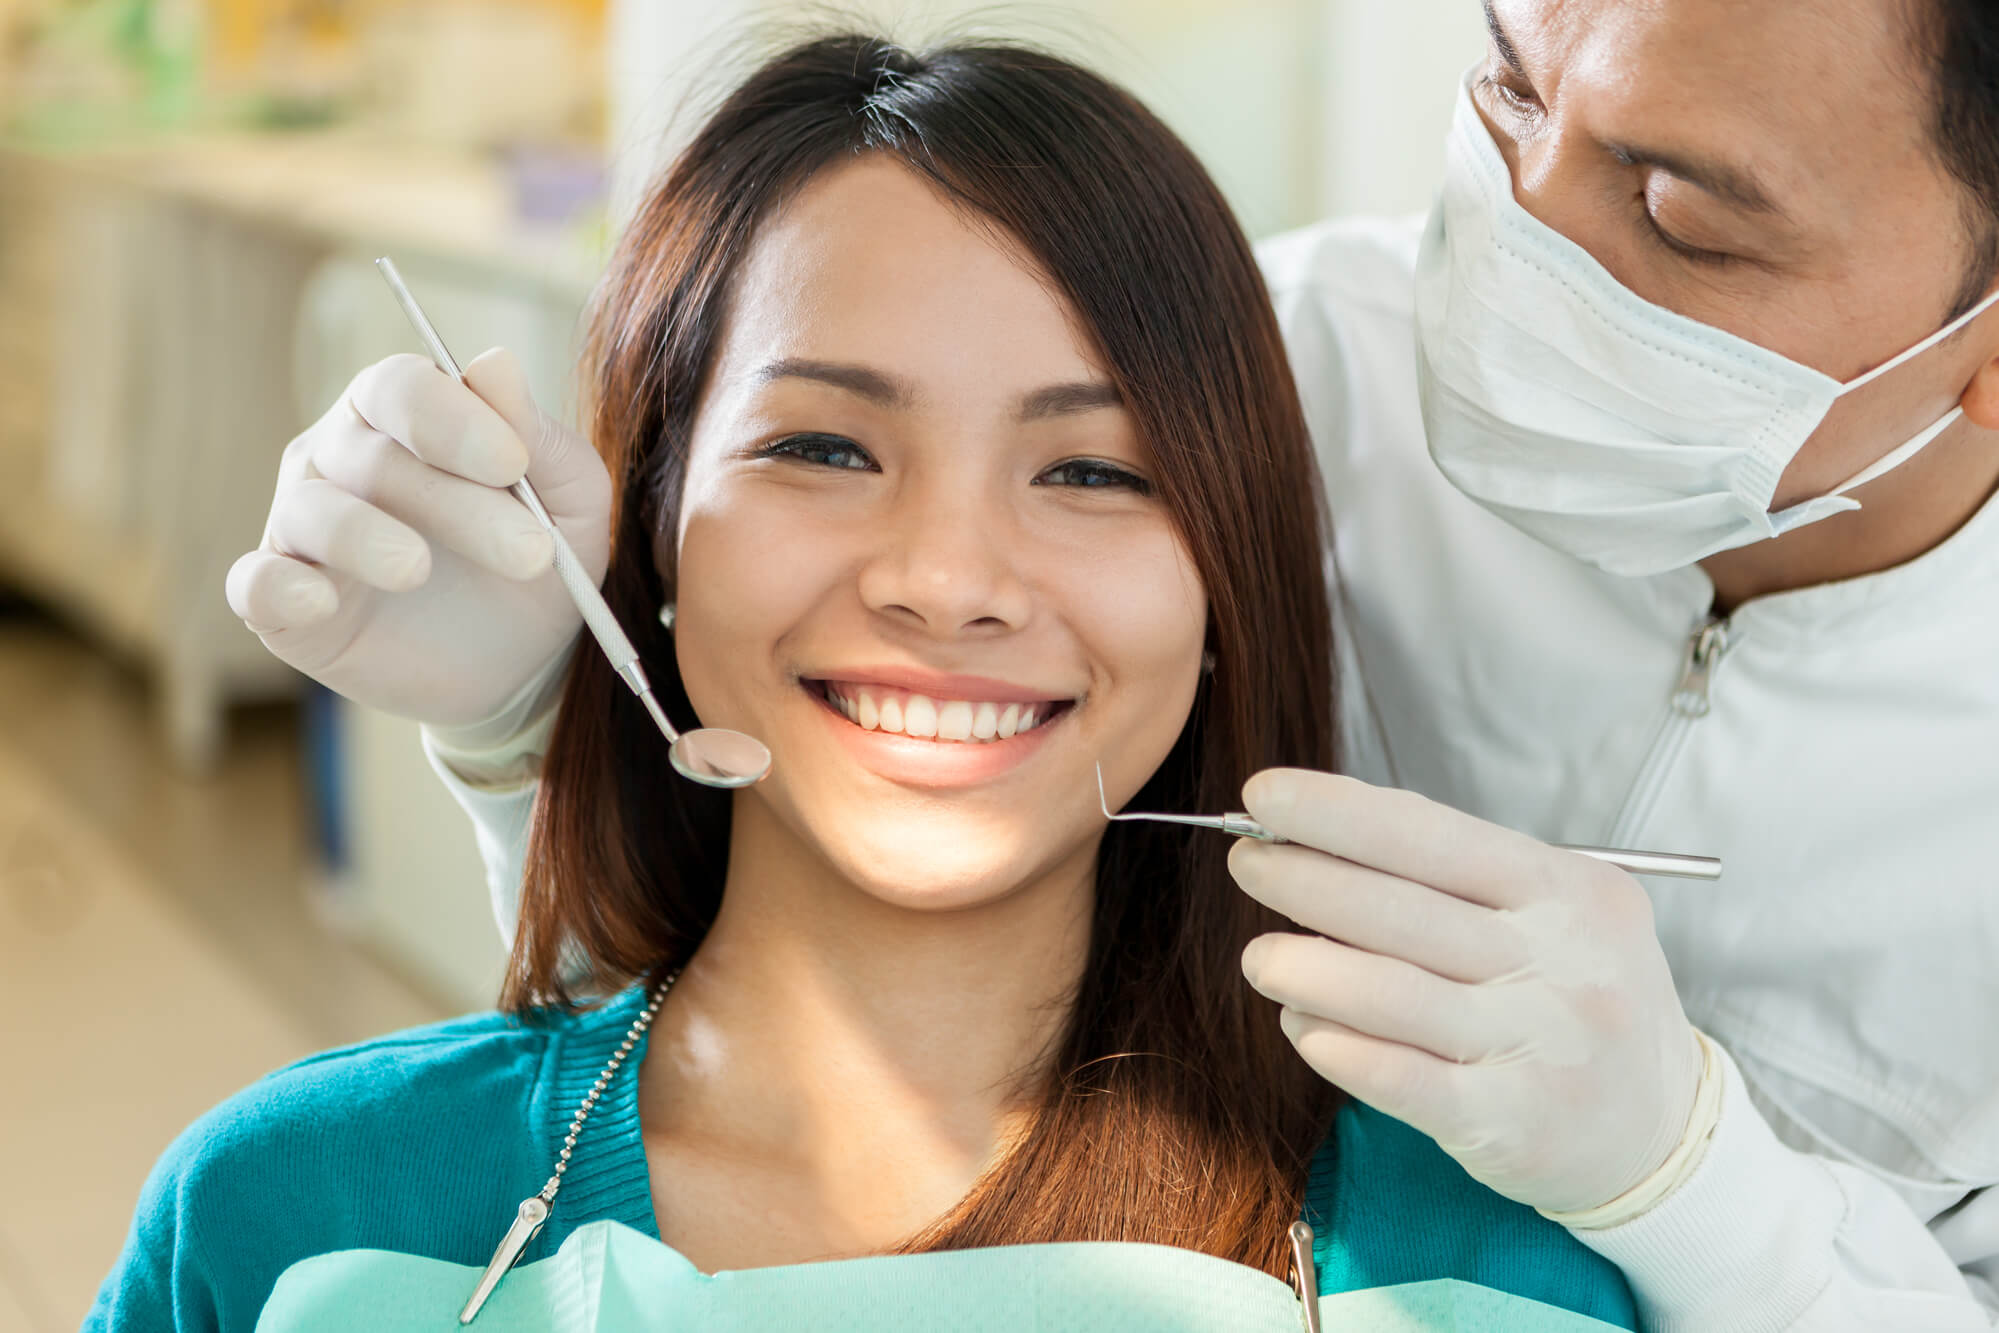 Portrait of smiling asian woman sitting at the dentist